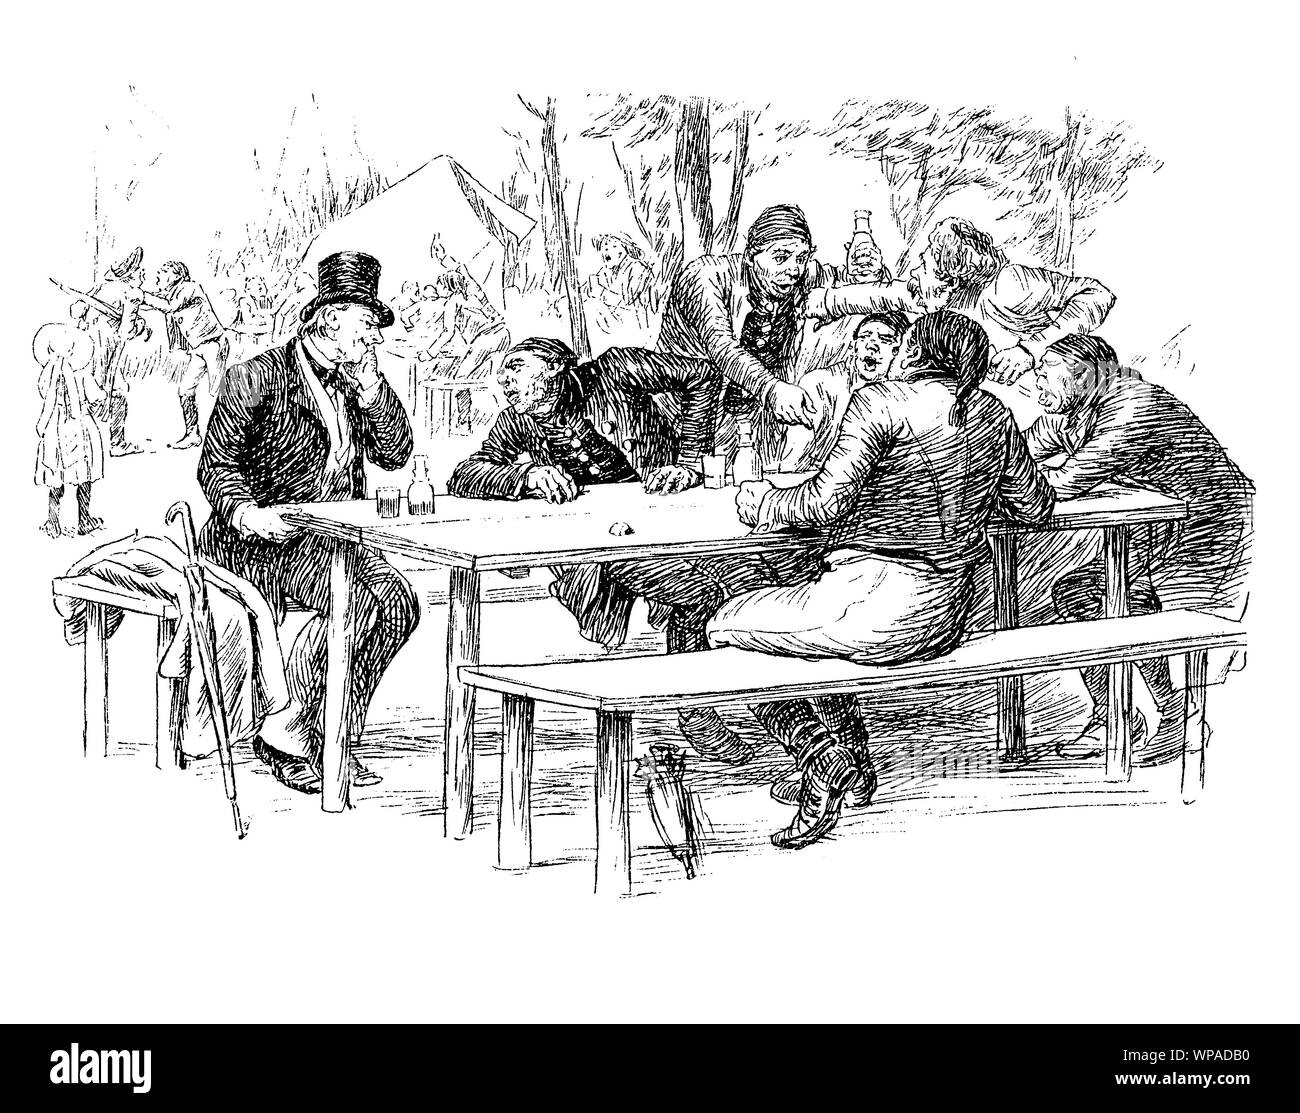 German satirical magazine of humor and caricatures: typical beer garden vignette, group of regulars of different social classes sitting outside drinking and chatting Stock Photo